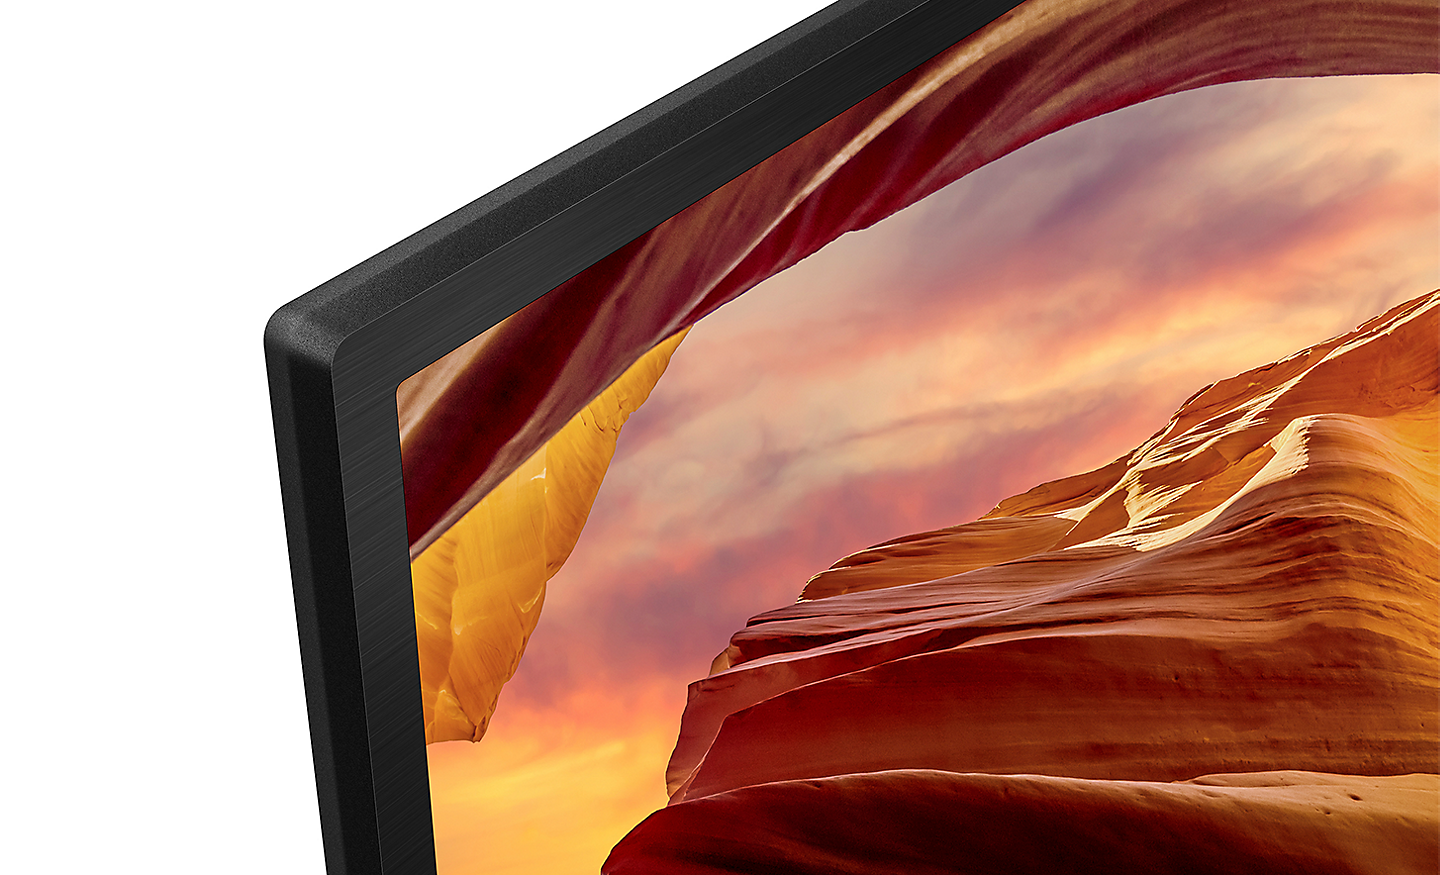 Close-up of the bezel of X64L Series BRAVIA TV with screenshot of rock formations